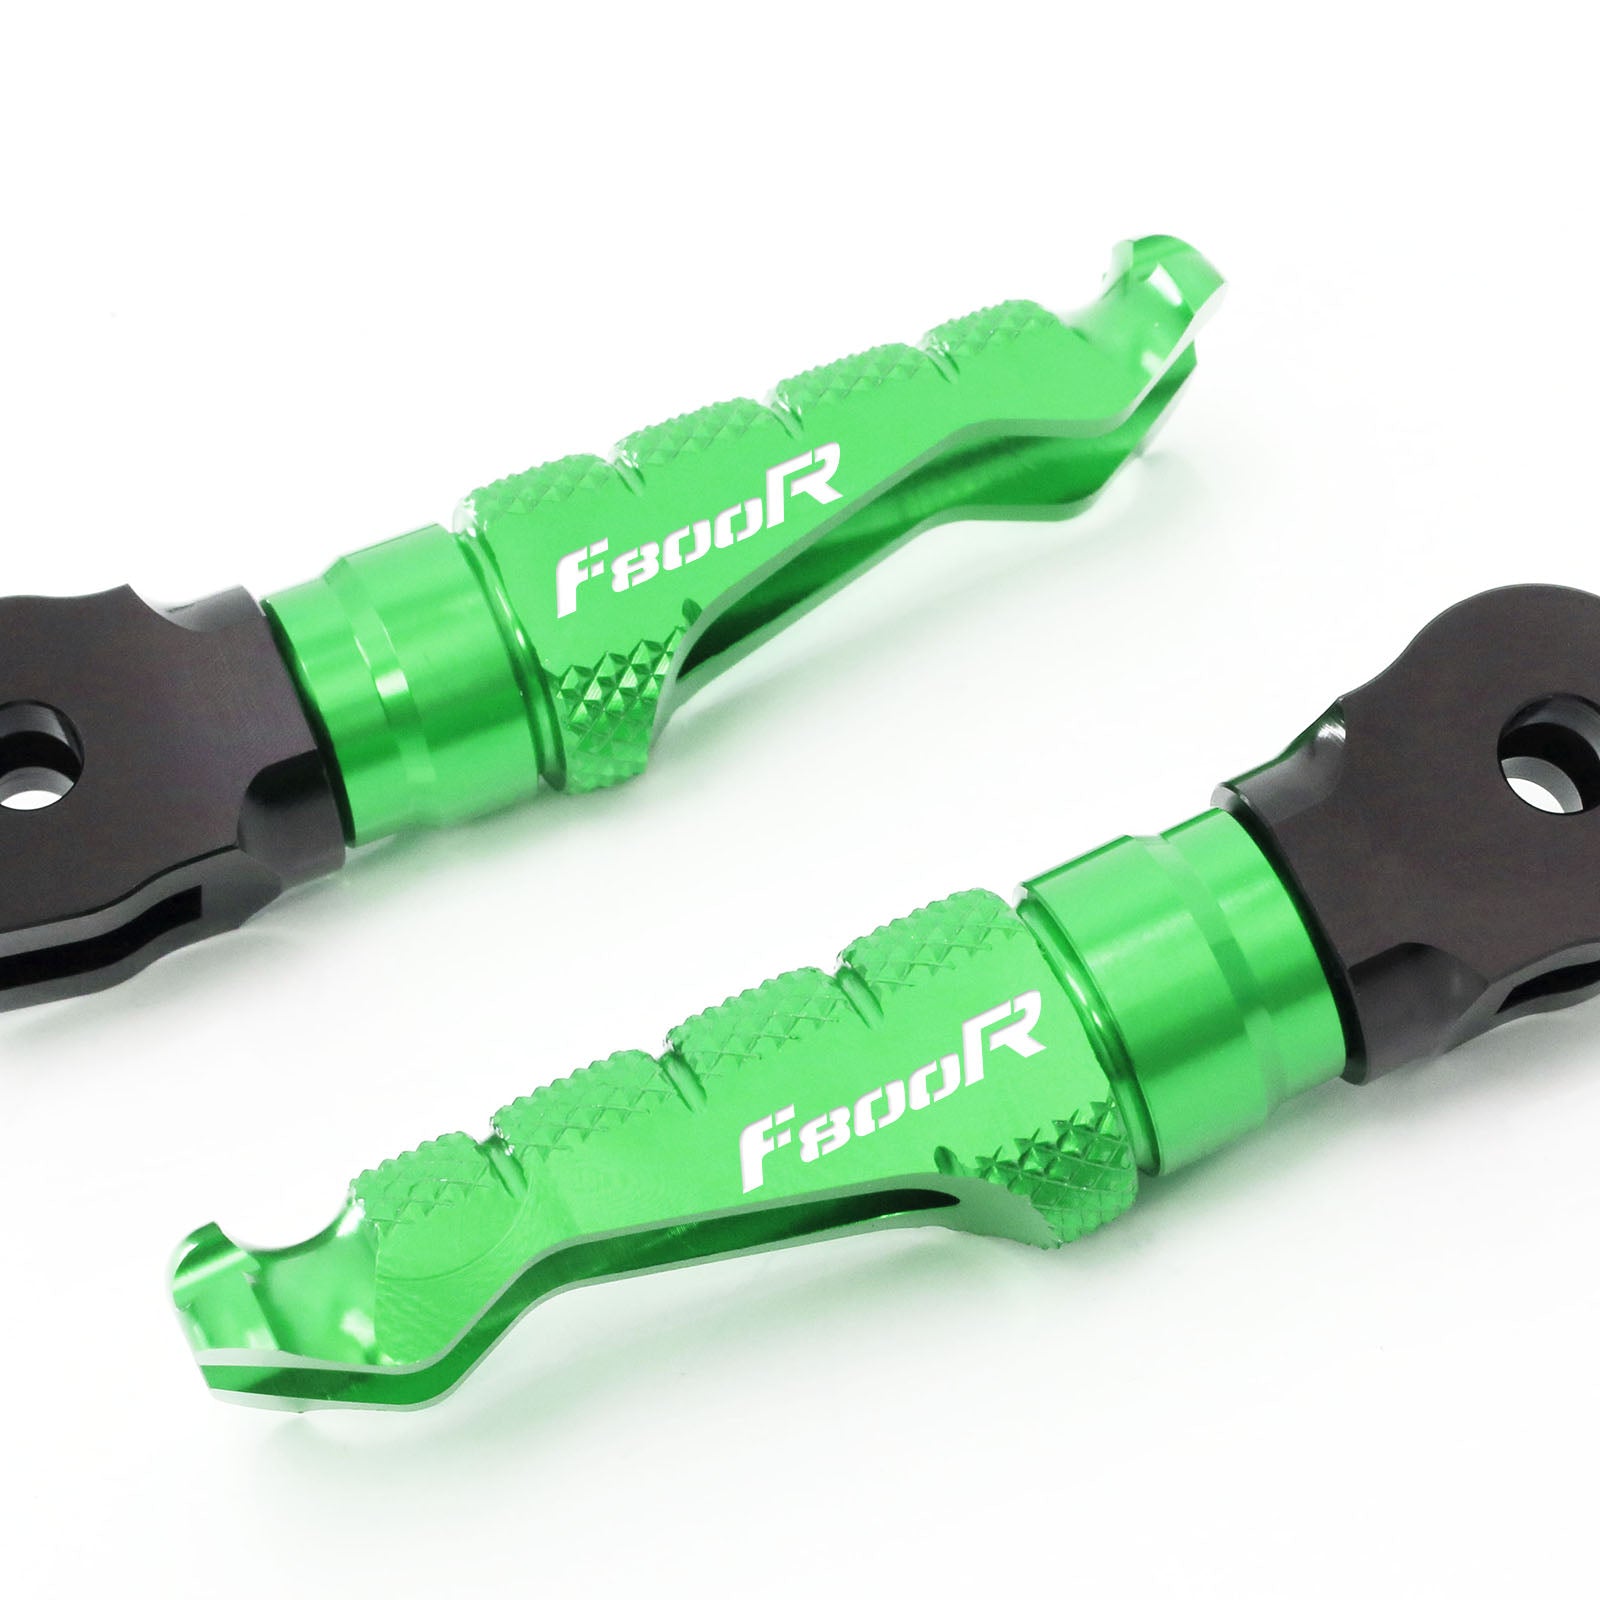 BMW F800R engraved front rider foot pegs